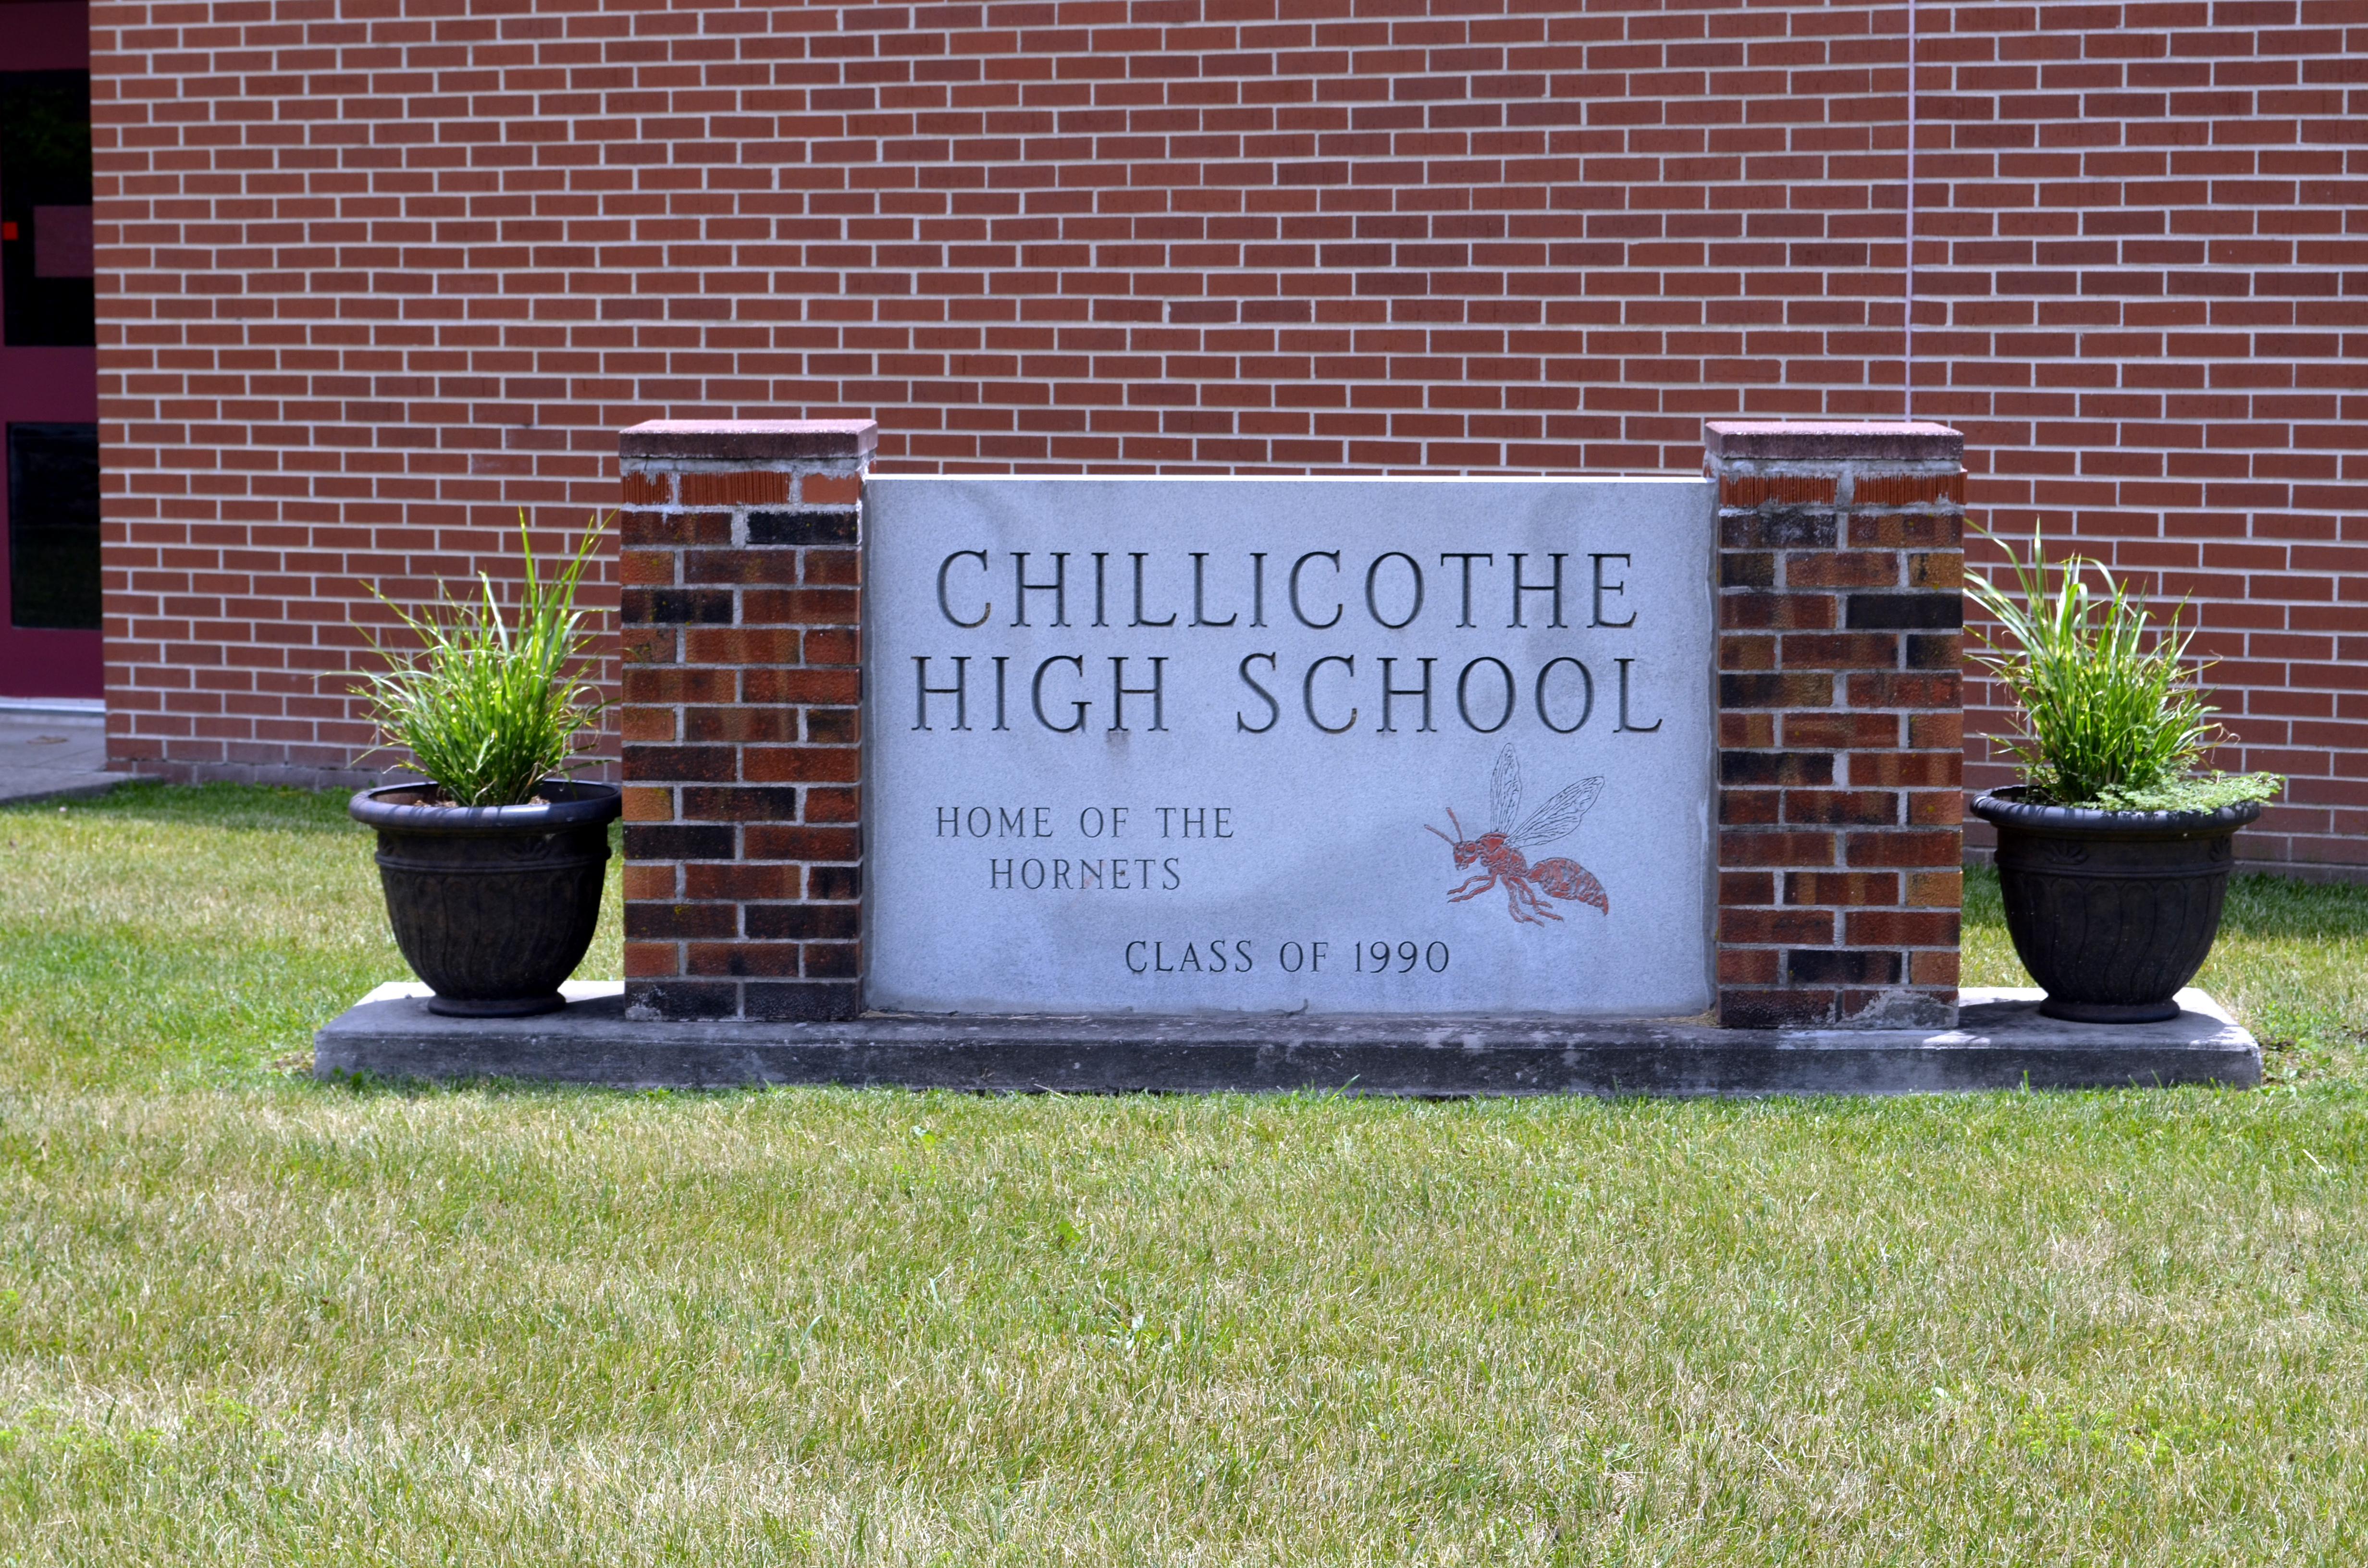 Chillicothe High School Homecoming – Friday